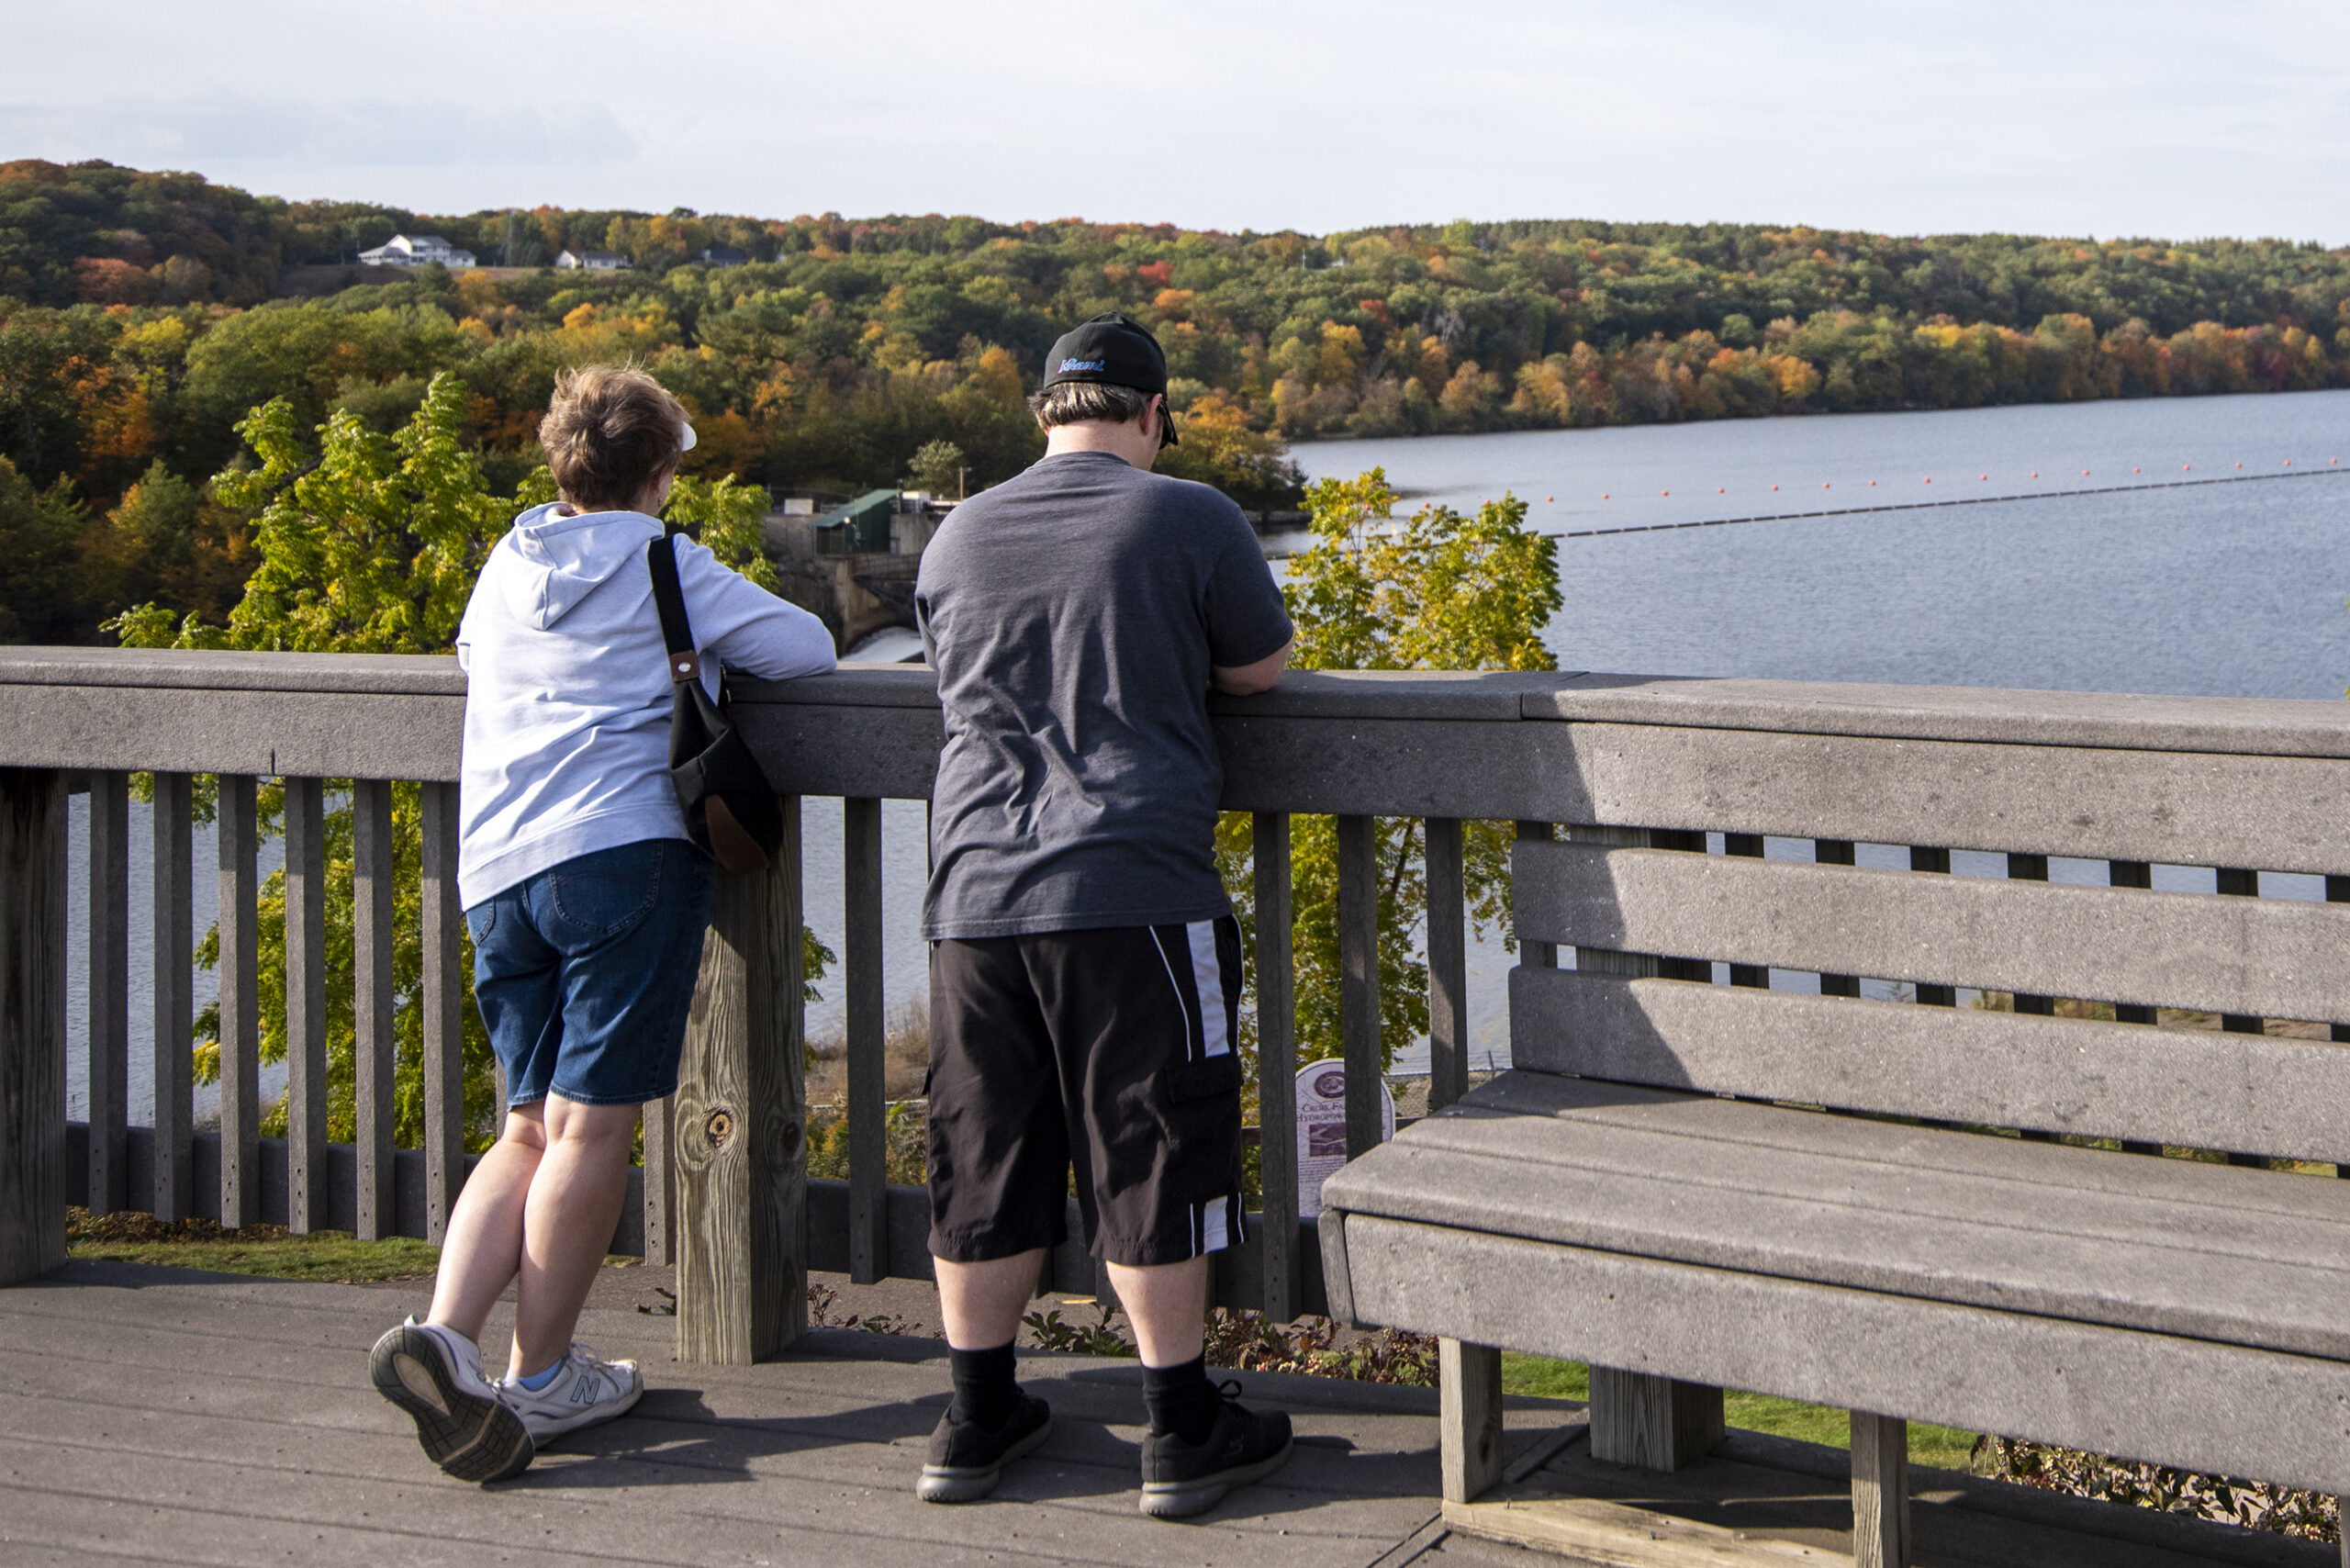 Two sight-seers lean on a railing overlooking a river and trees.